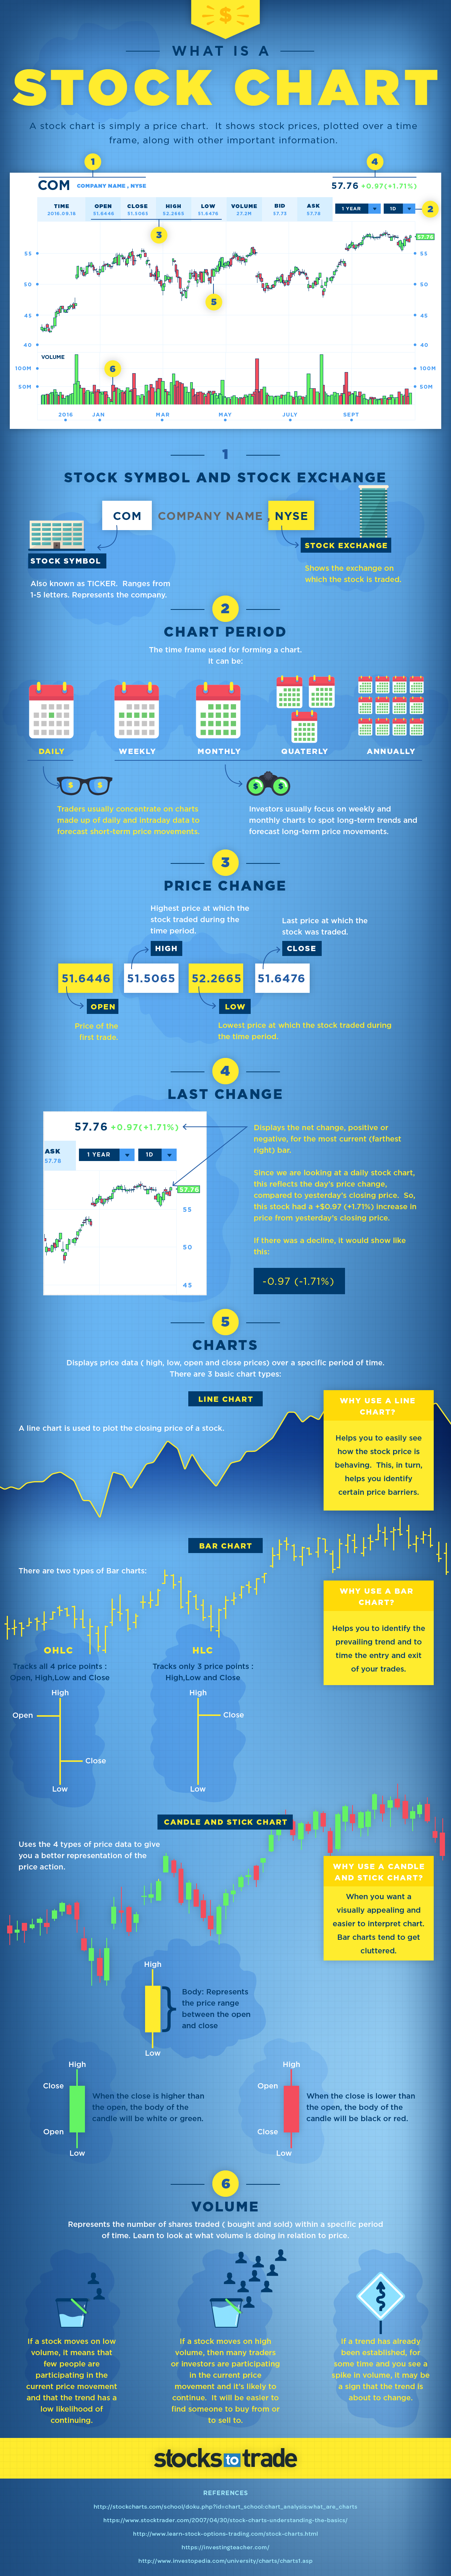 What Is A Stock Chart(Infographic)